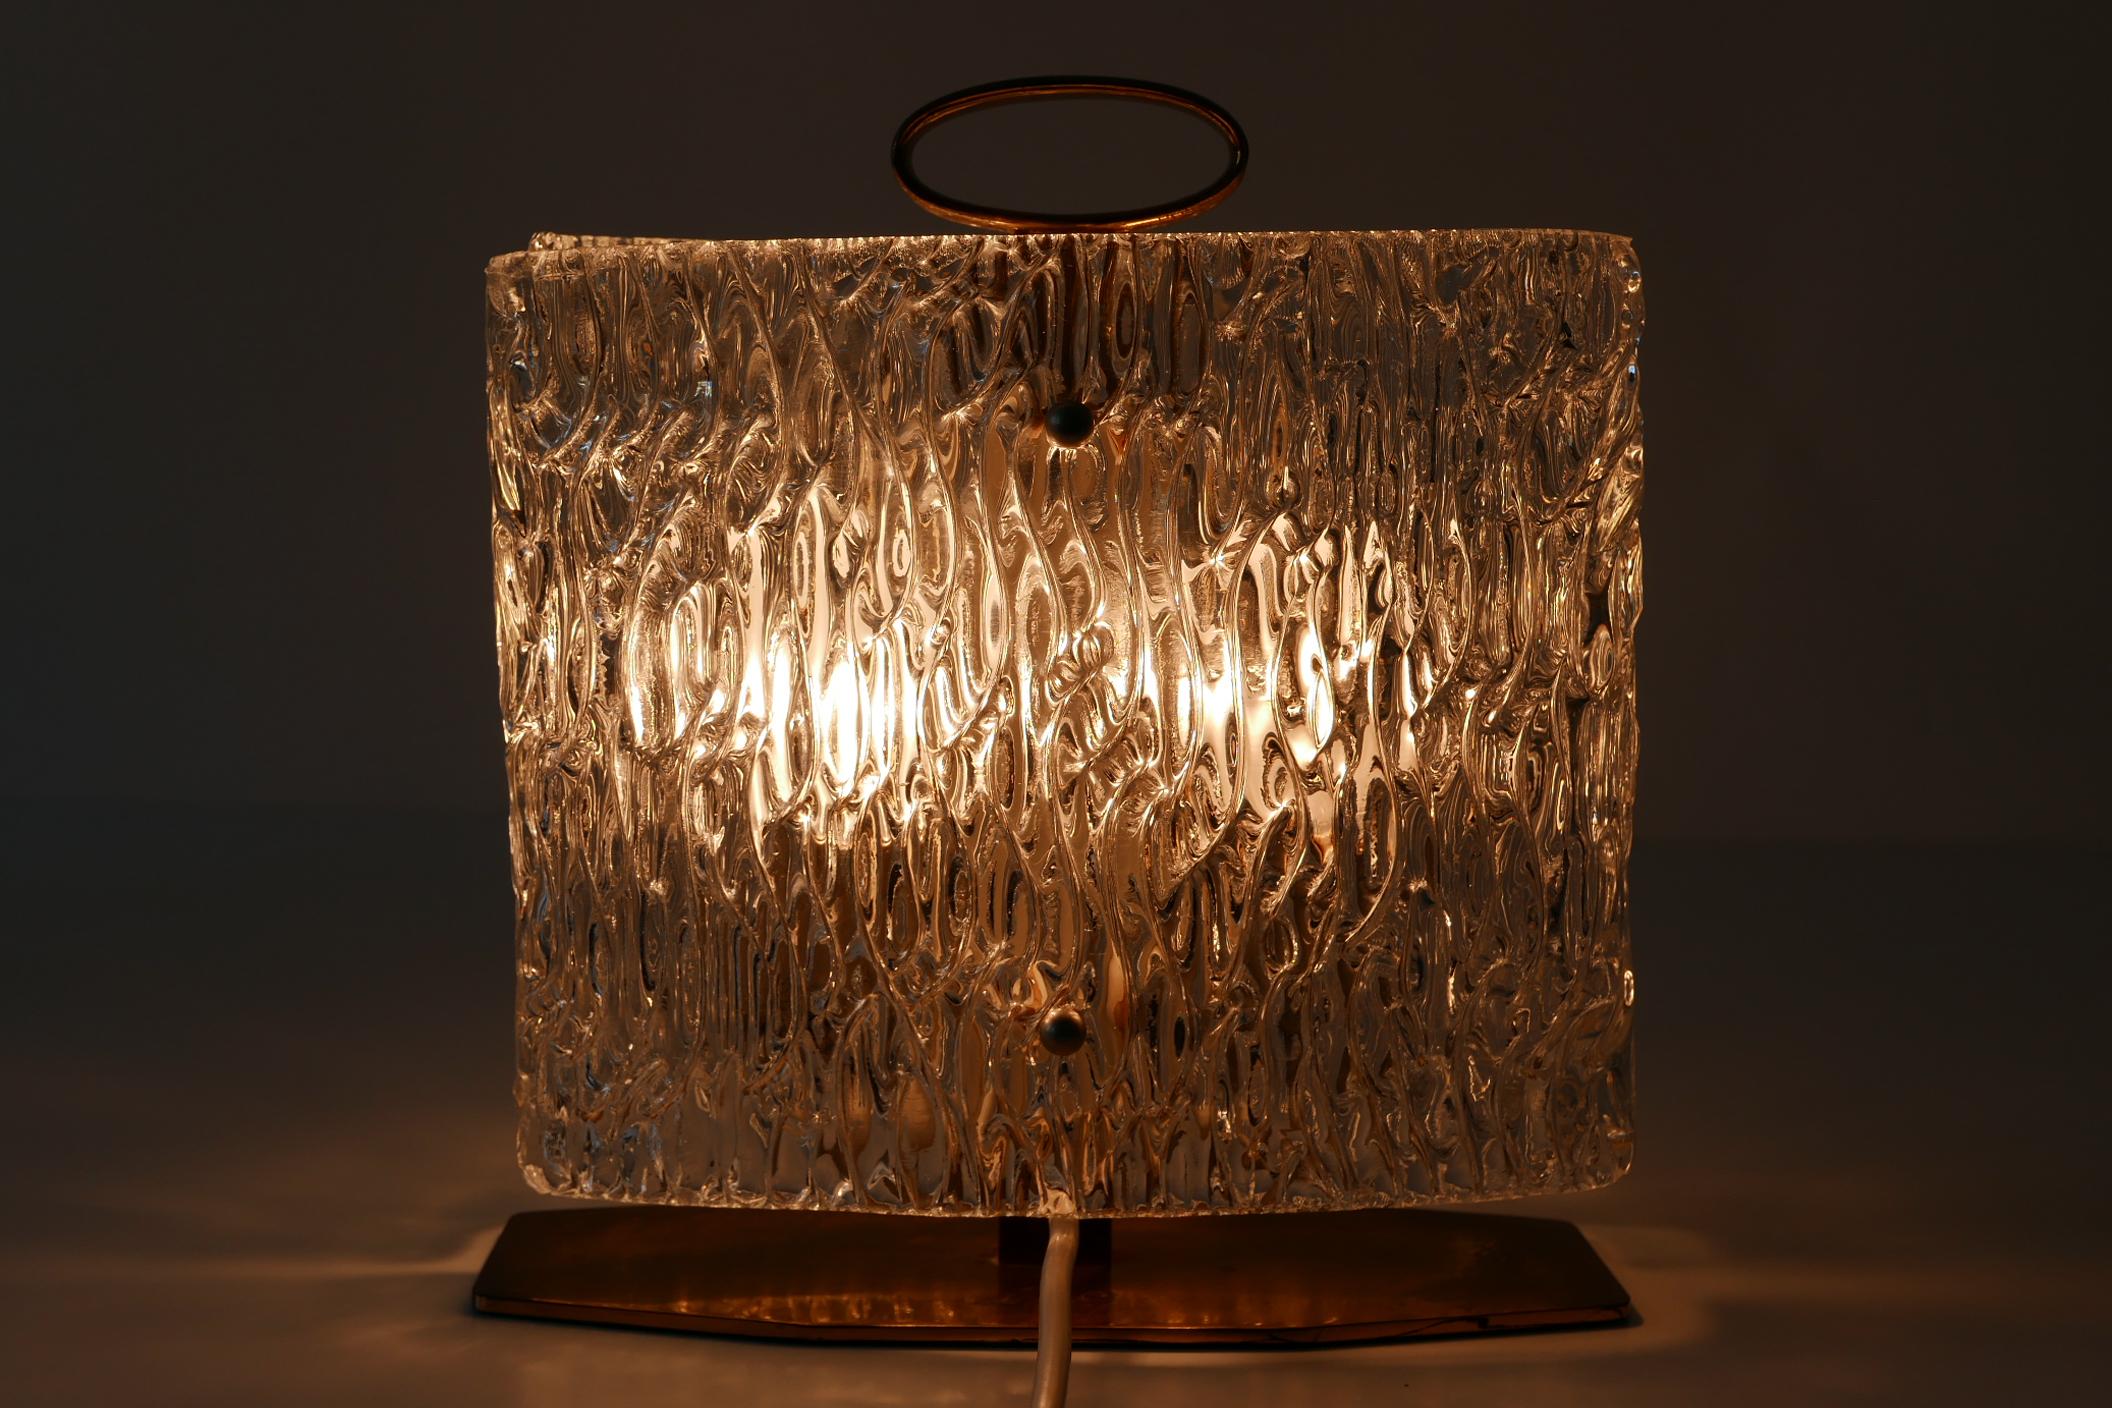 Exceptional Mid-Century Modern Table Lamp with Ice Glass Shade, 1950s, Italy For Sale 11